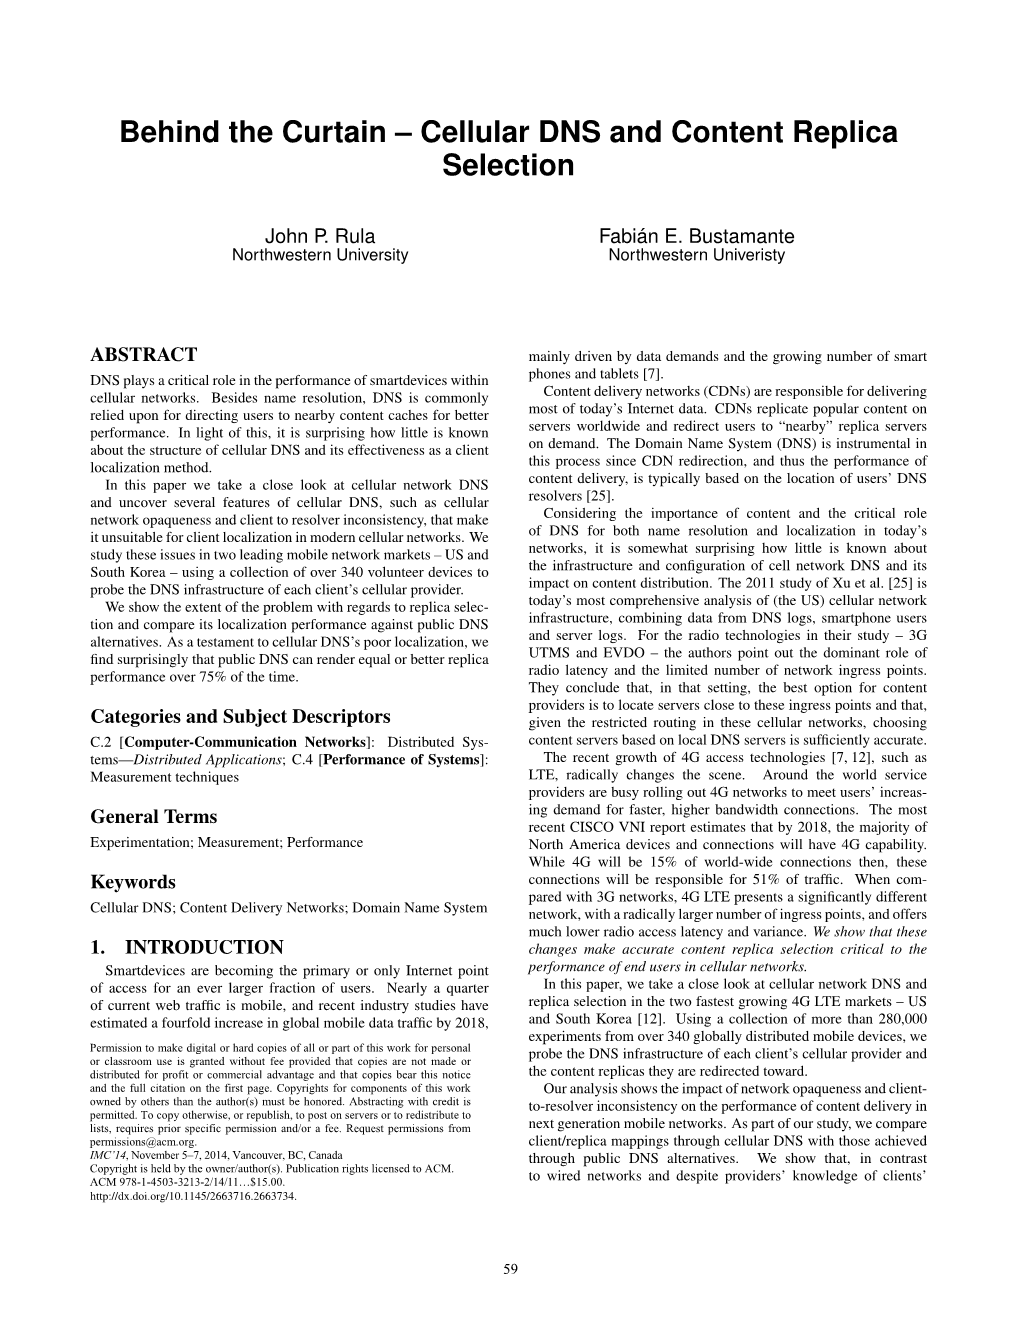 Cellular DNS and Content Replica Selection